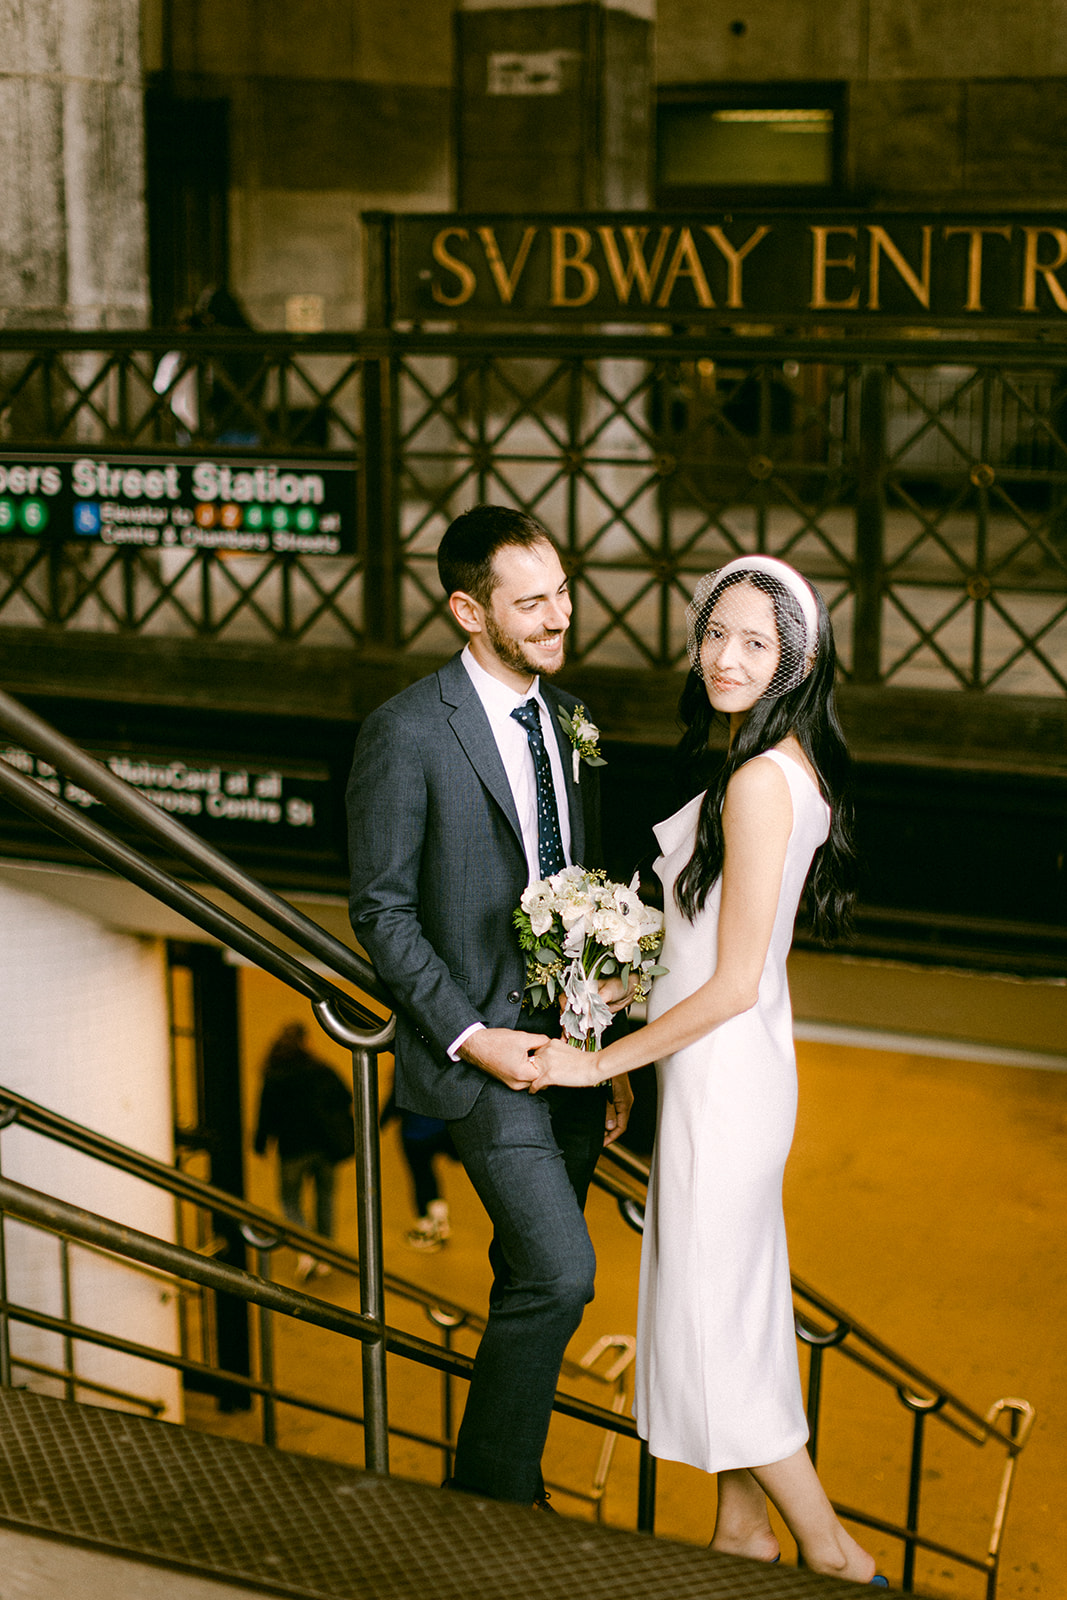 https://weddingsbynato.com/an-intimate-elopement-at-nyc-city-hall/